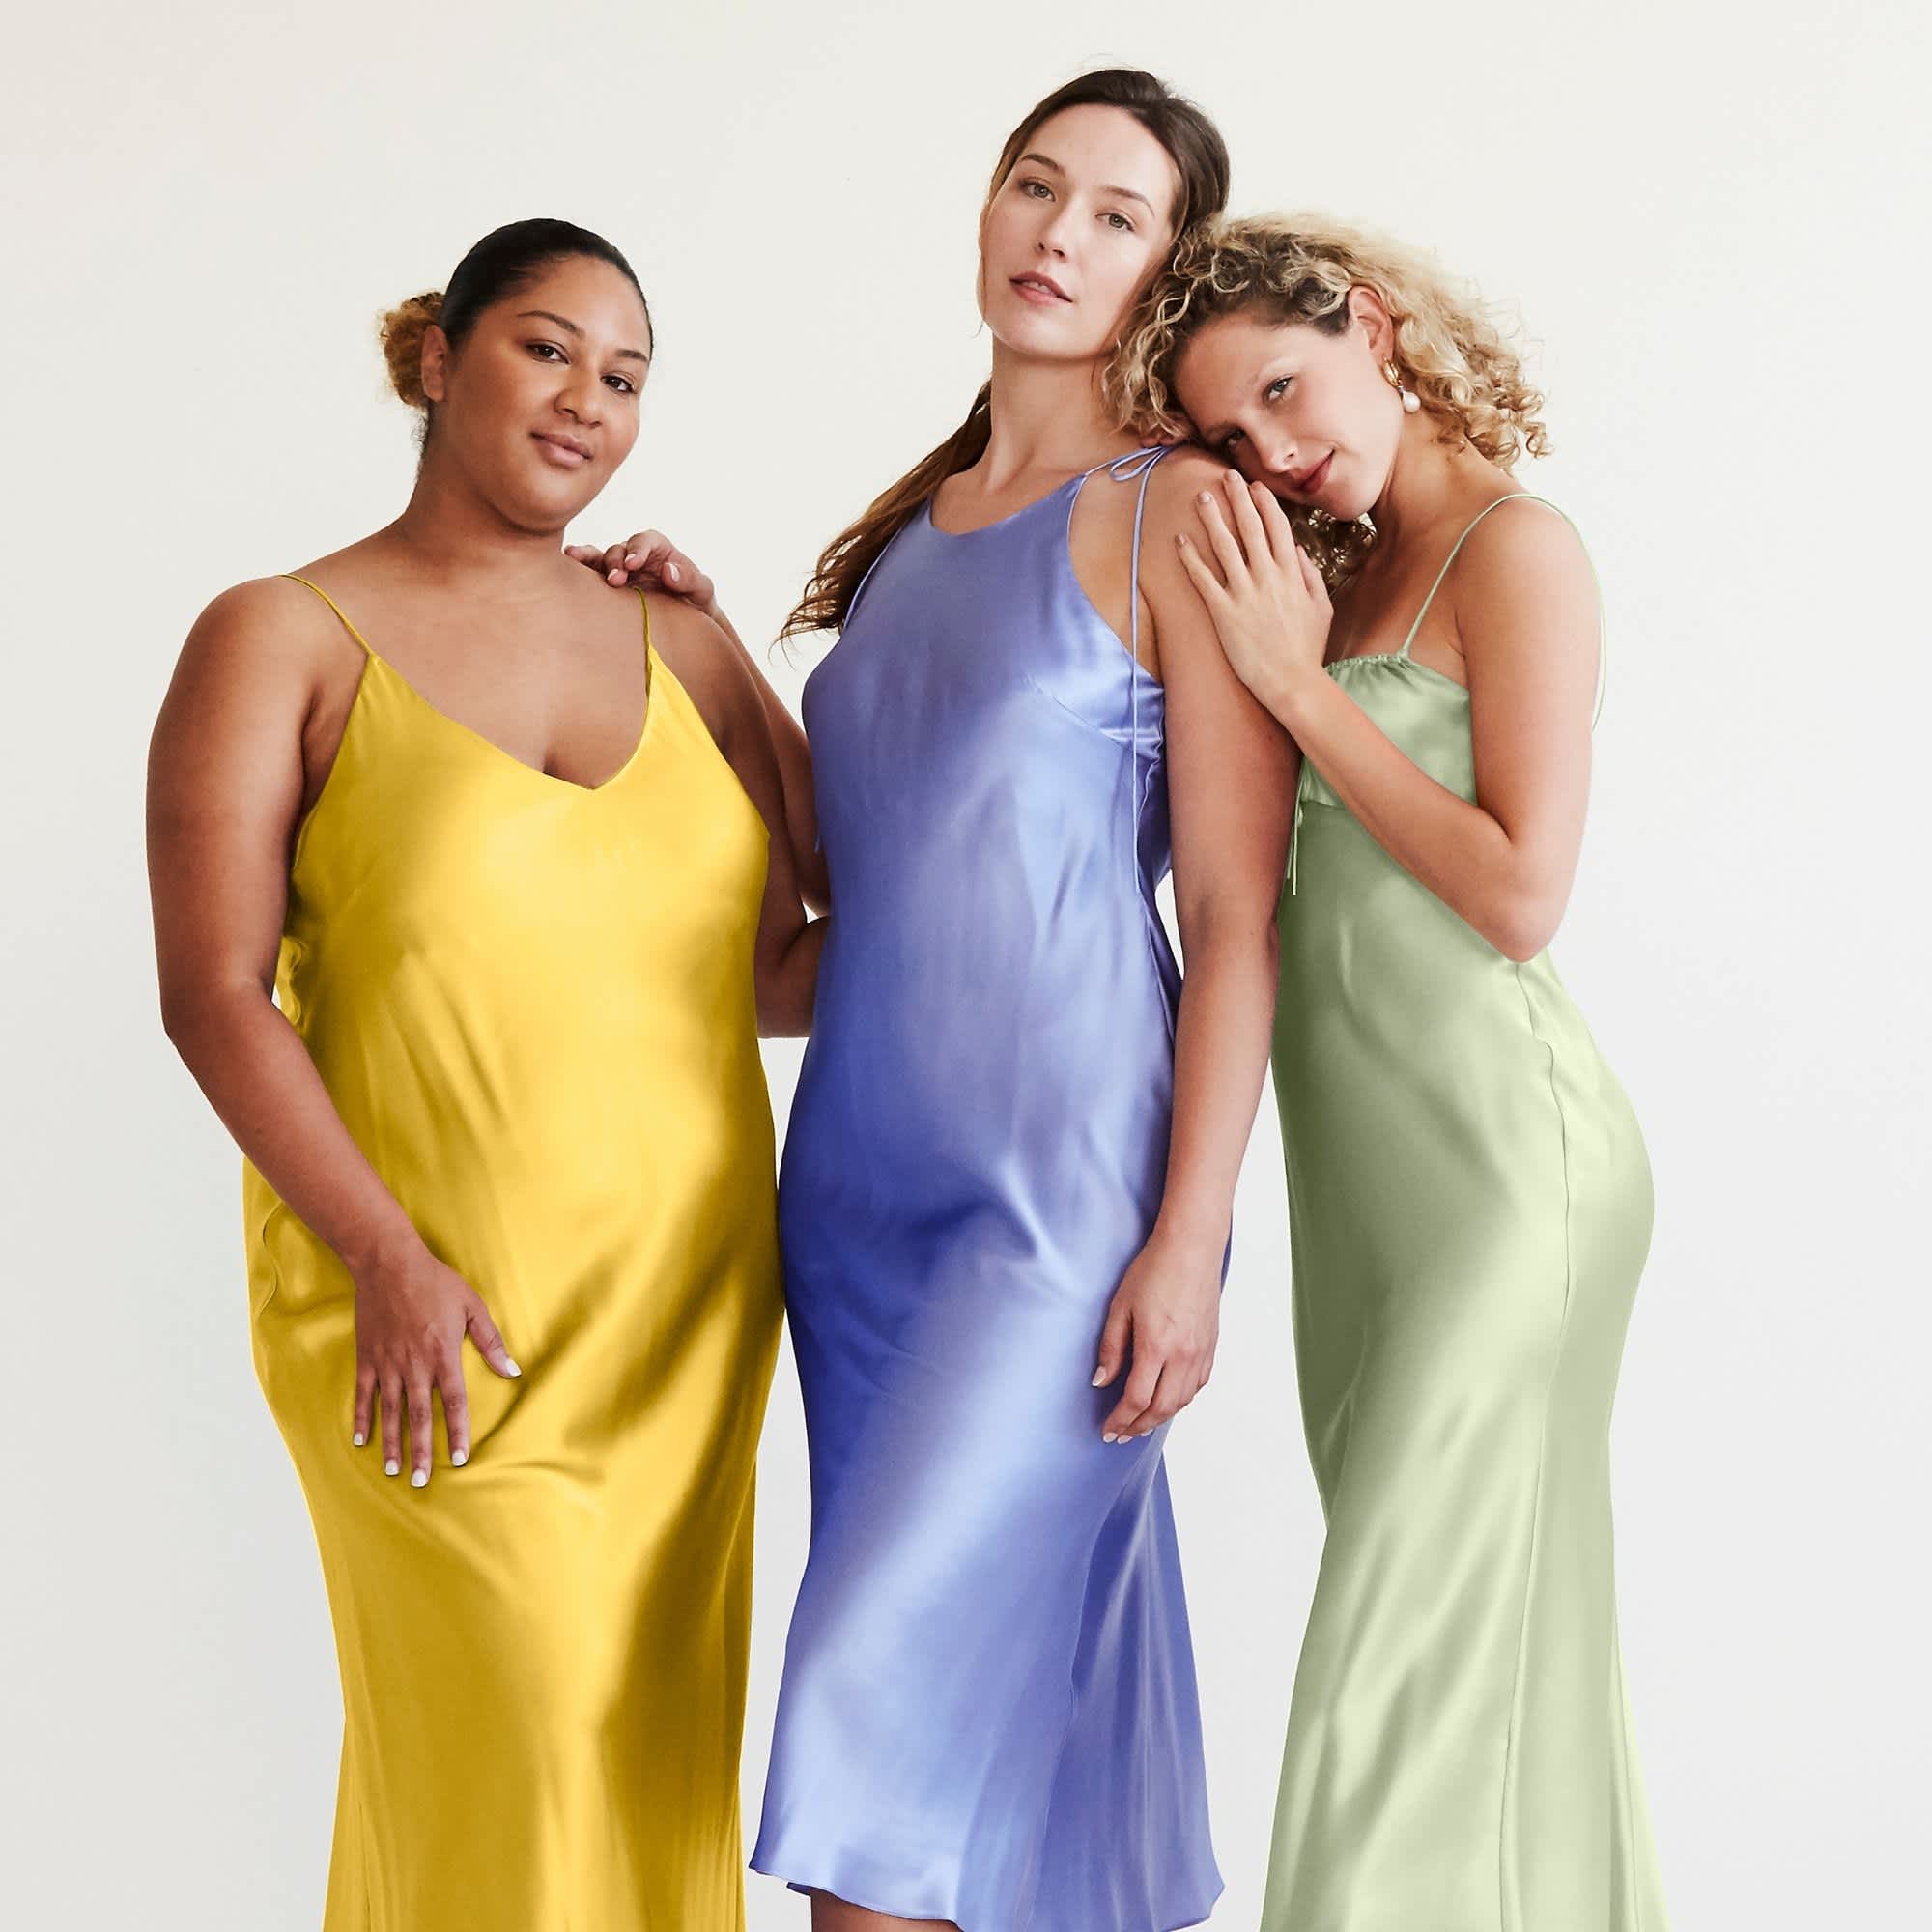 To Promote Size Inclusivity This Australian Brand Launched A Made To Order Silk Collection